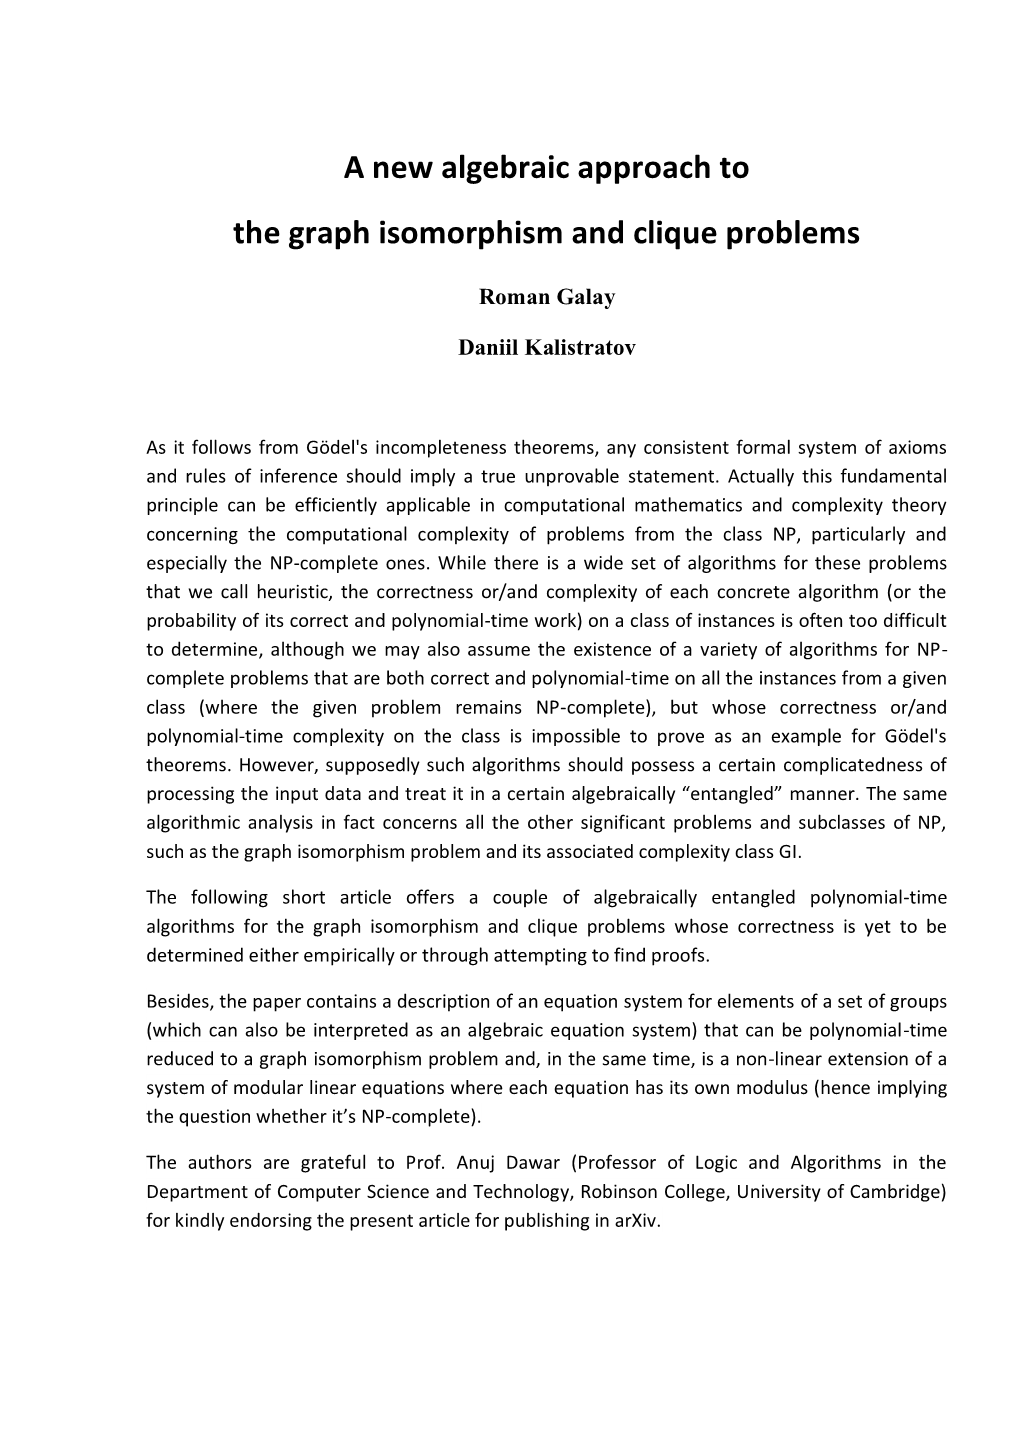 A New Algebraic Approach to the Graph Isomorphism and Clique Problems